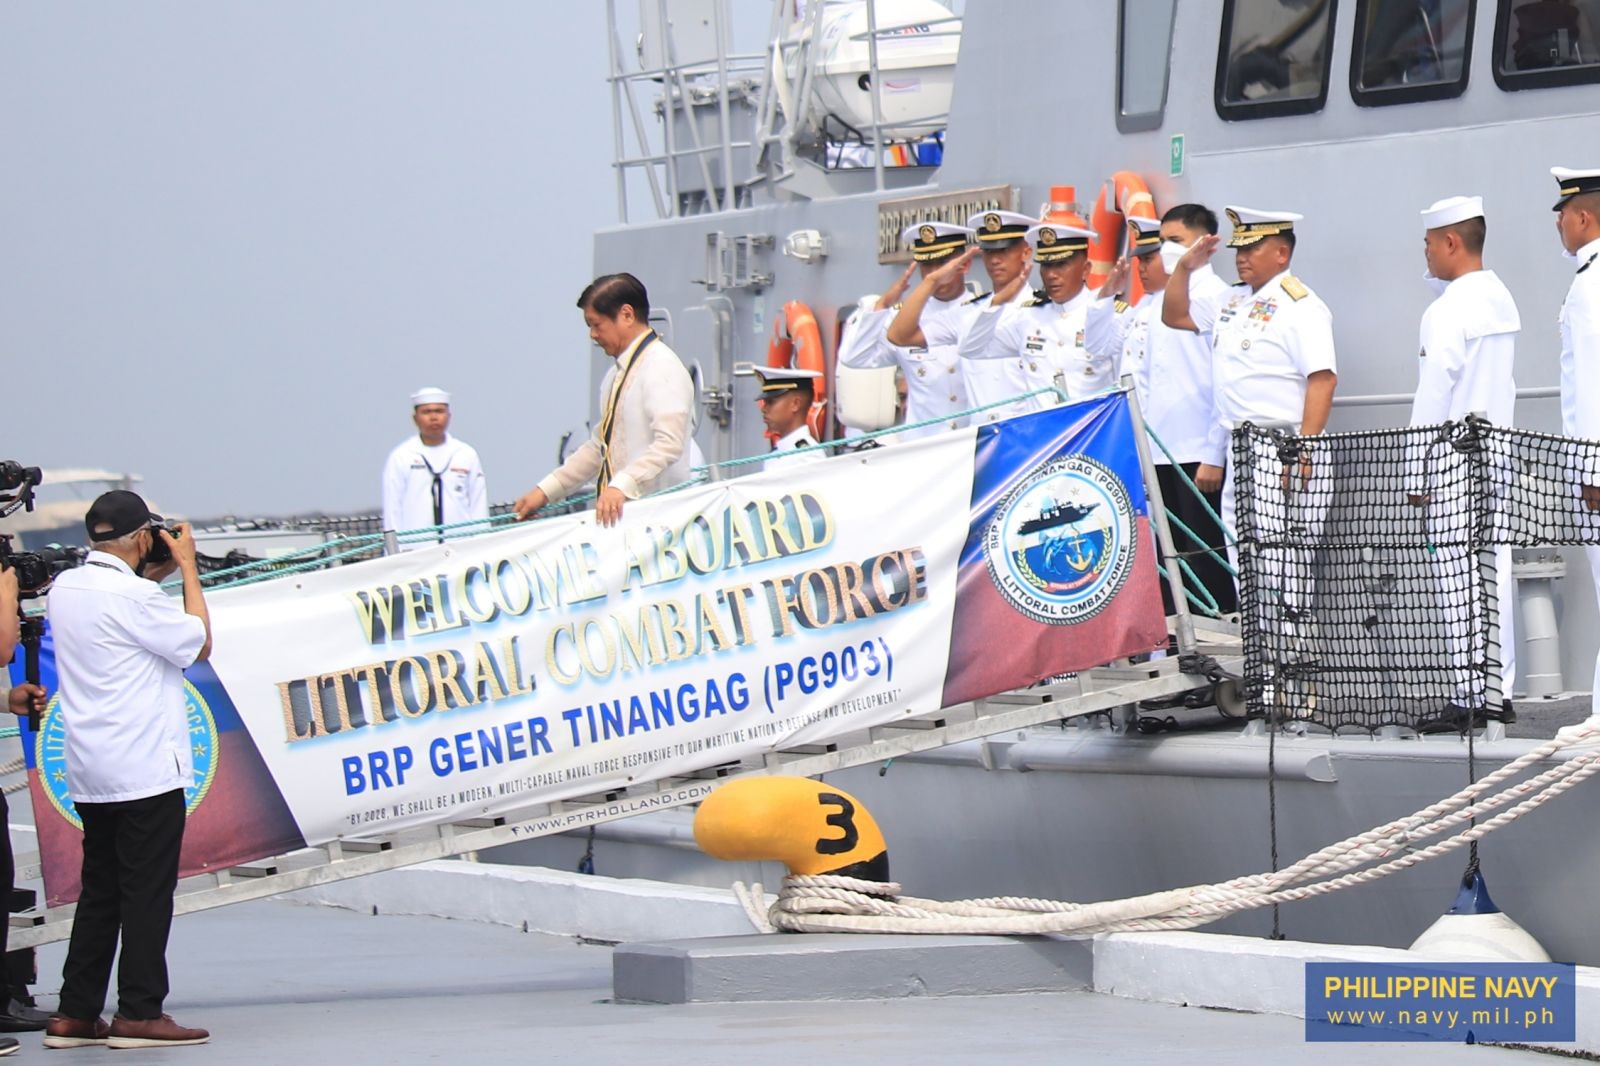 2 fast attack interdiction craft - missile (FAIC-M) boats commissioned by President Marcos during PH #Navy’s 125th Founding Anniversary